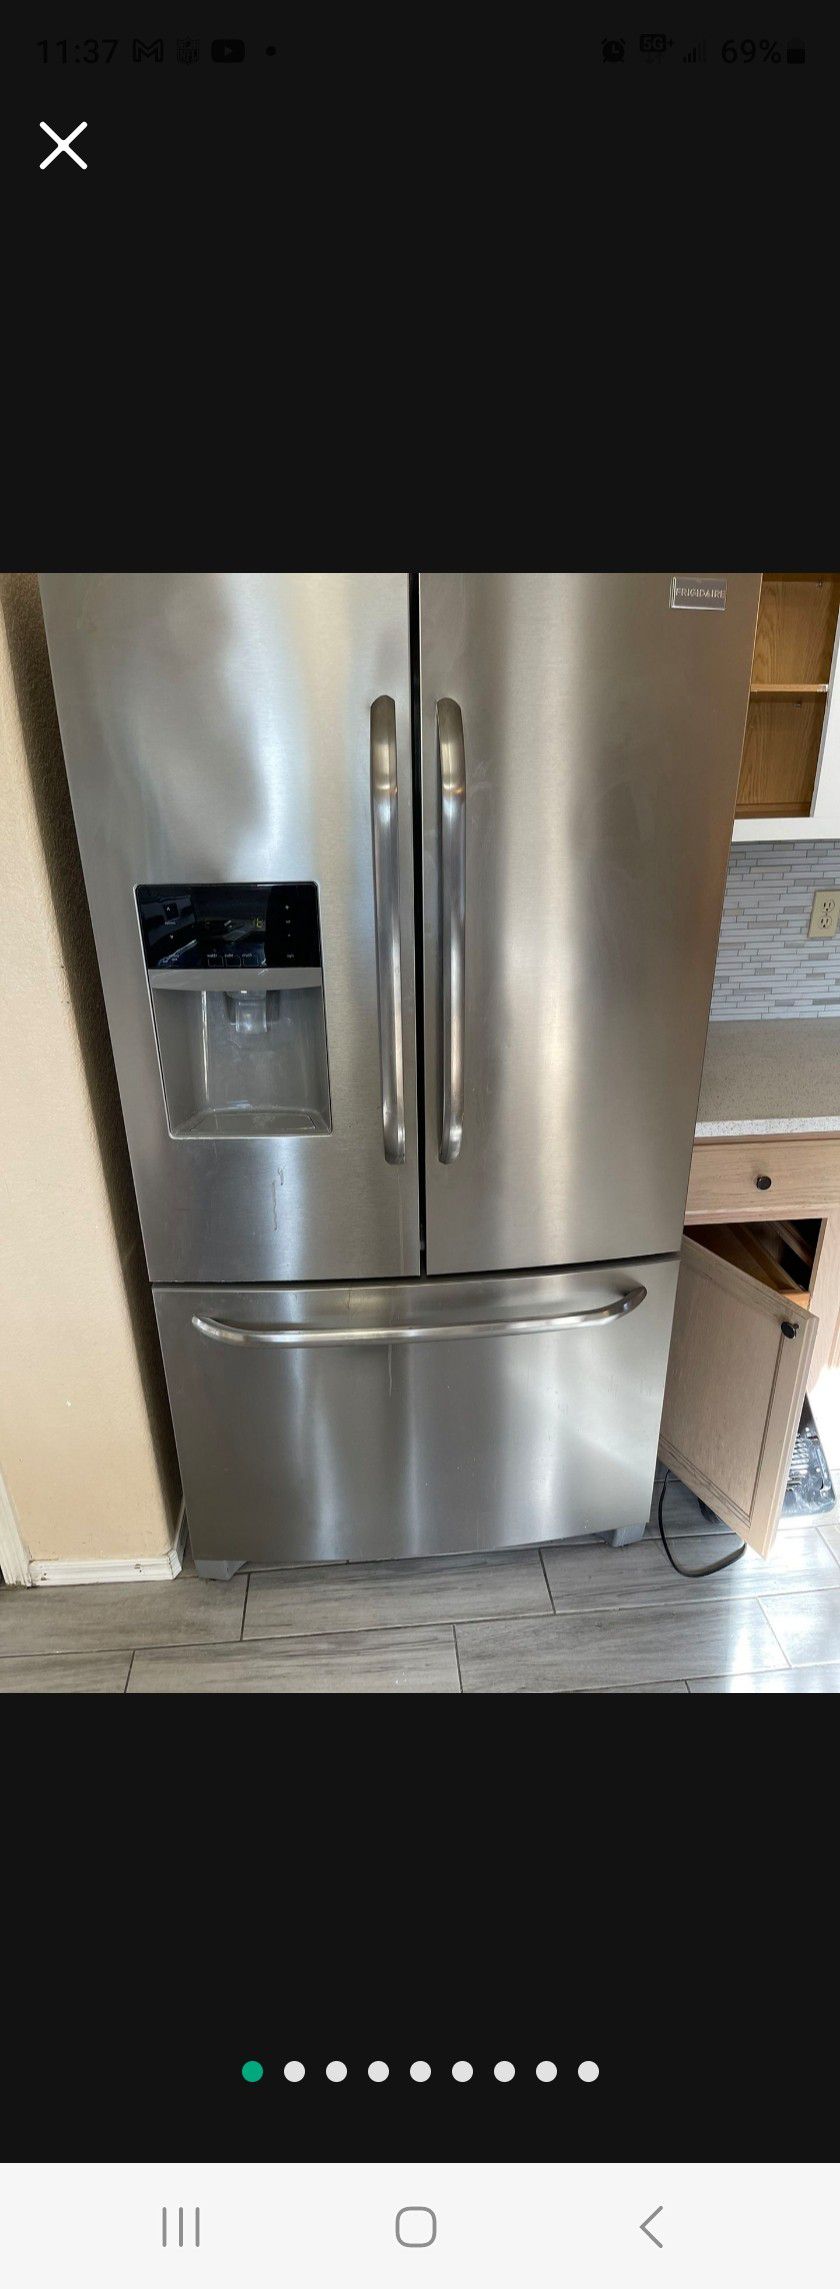 STAINLESS STEEL KITCHEN APPLIANCES,  FREE DELIVERY AND INSTALLATION,  30 DAYS WARRANTY 